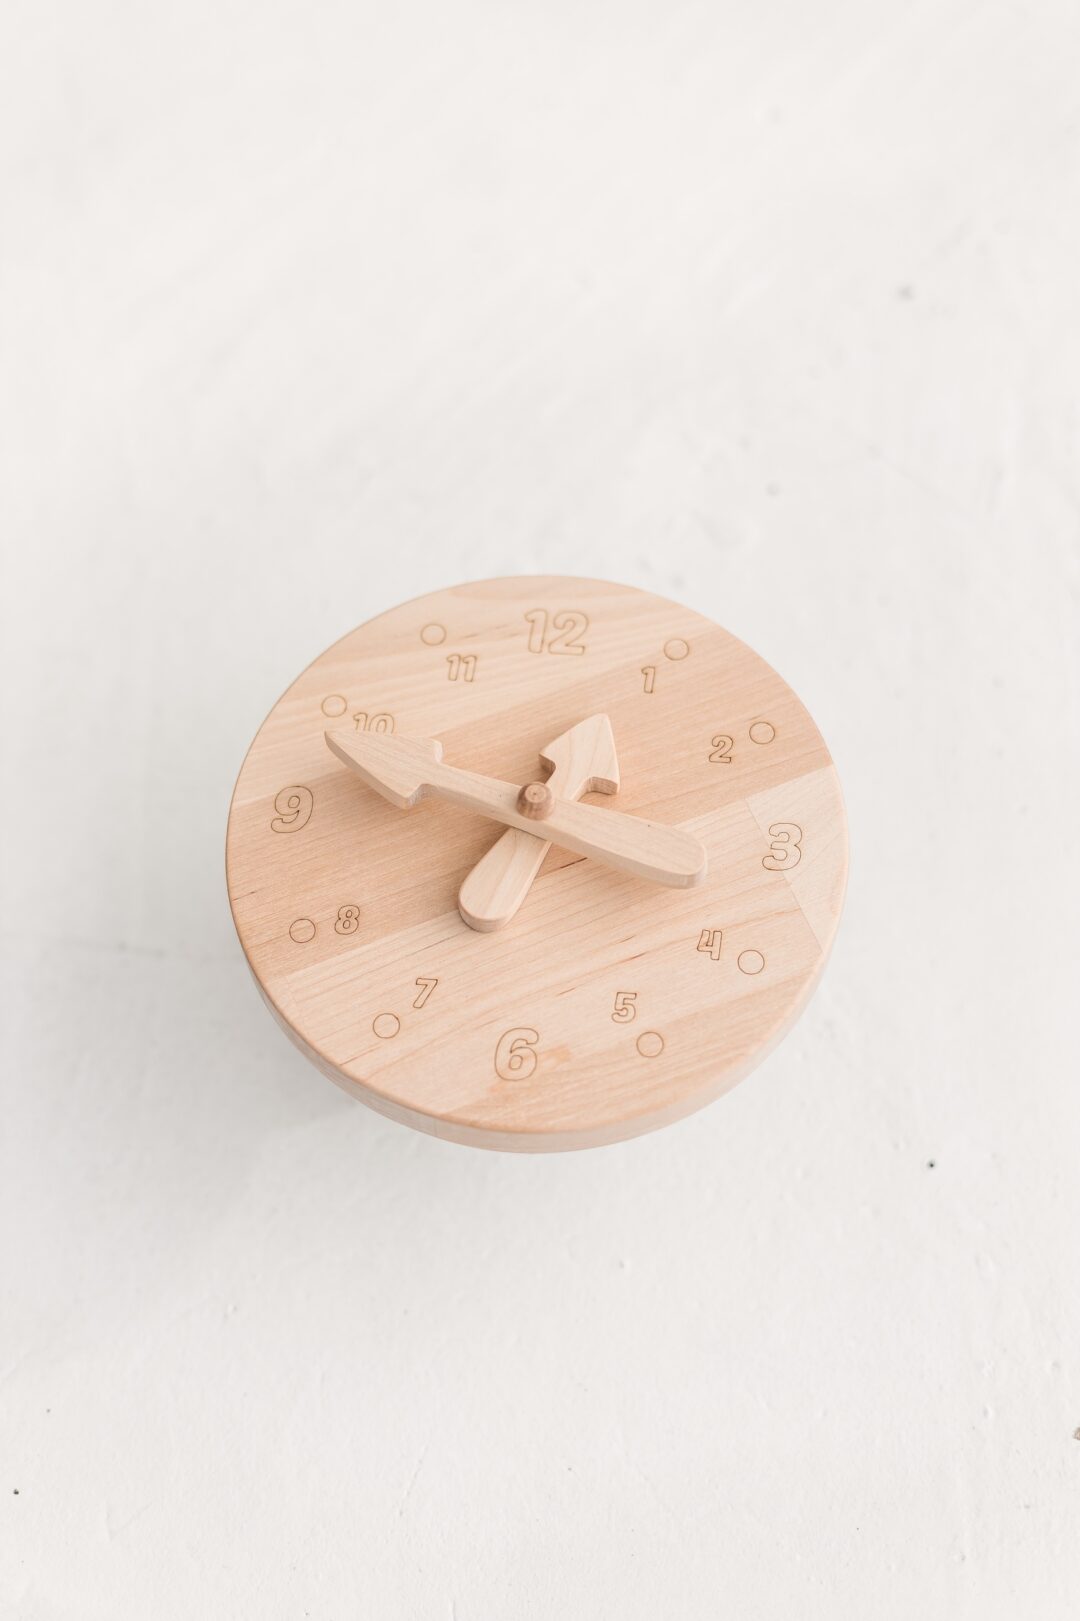 This wooden clock toy is the perfect addition to your Montessori materials collection.